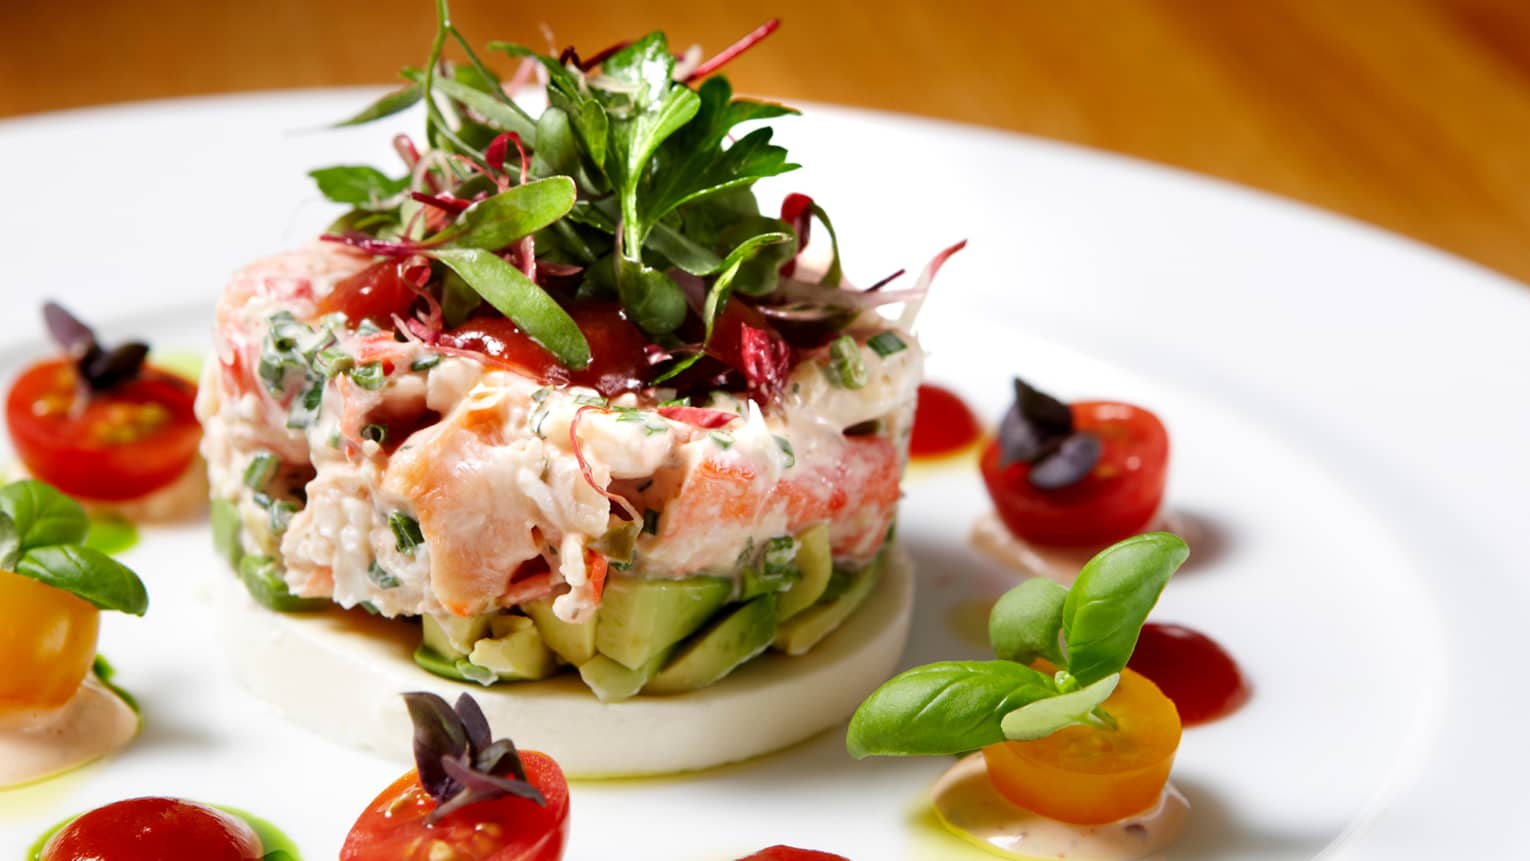 Round Dungeness Crab with chopped avocado, greens garnished with tomatoes, basil